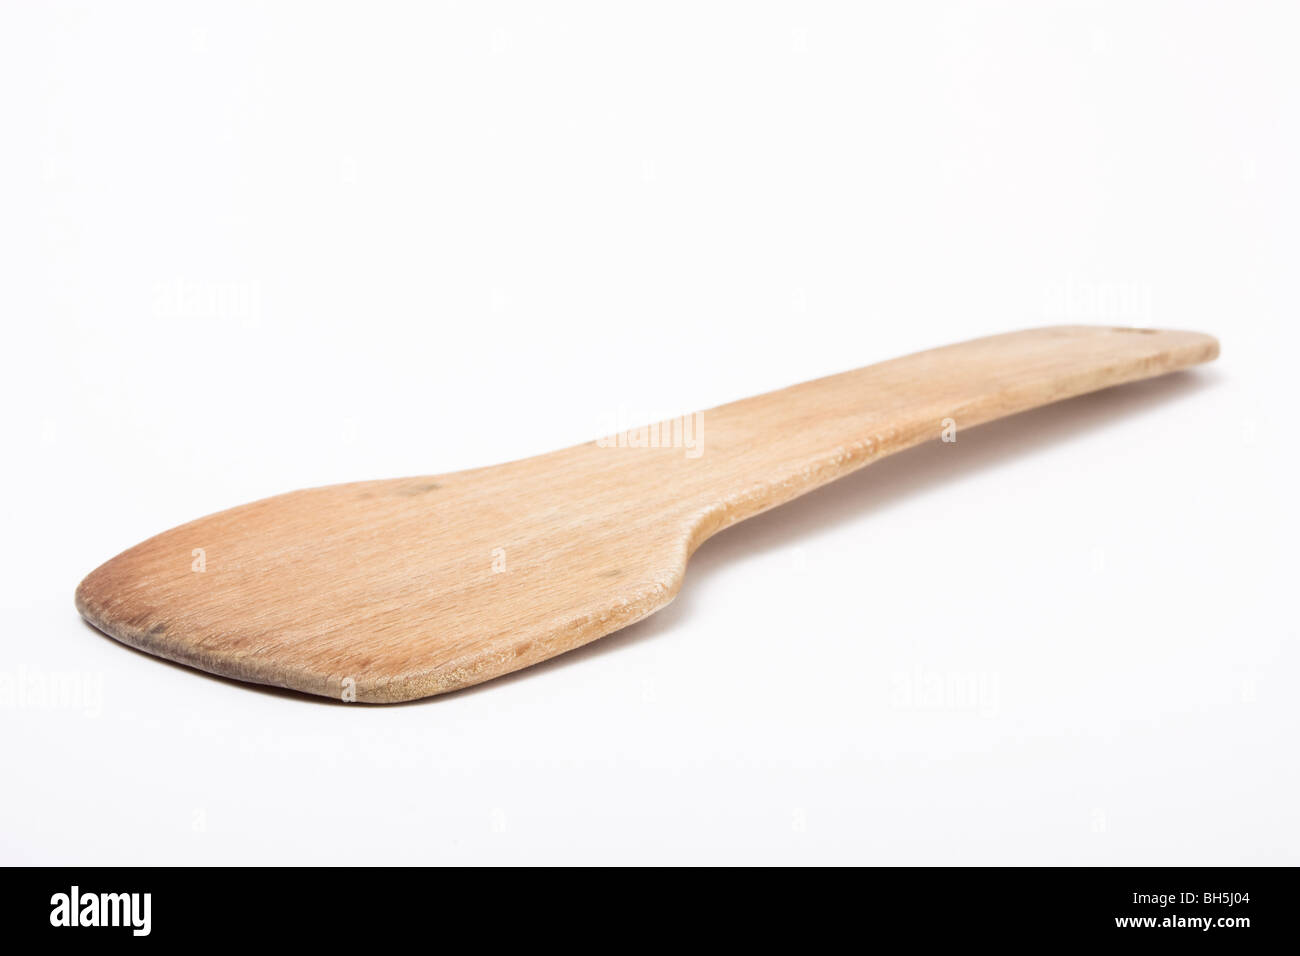 well used wooden kitchen Spatula isolated against white background. Stock Photo